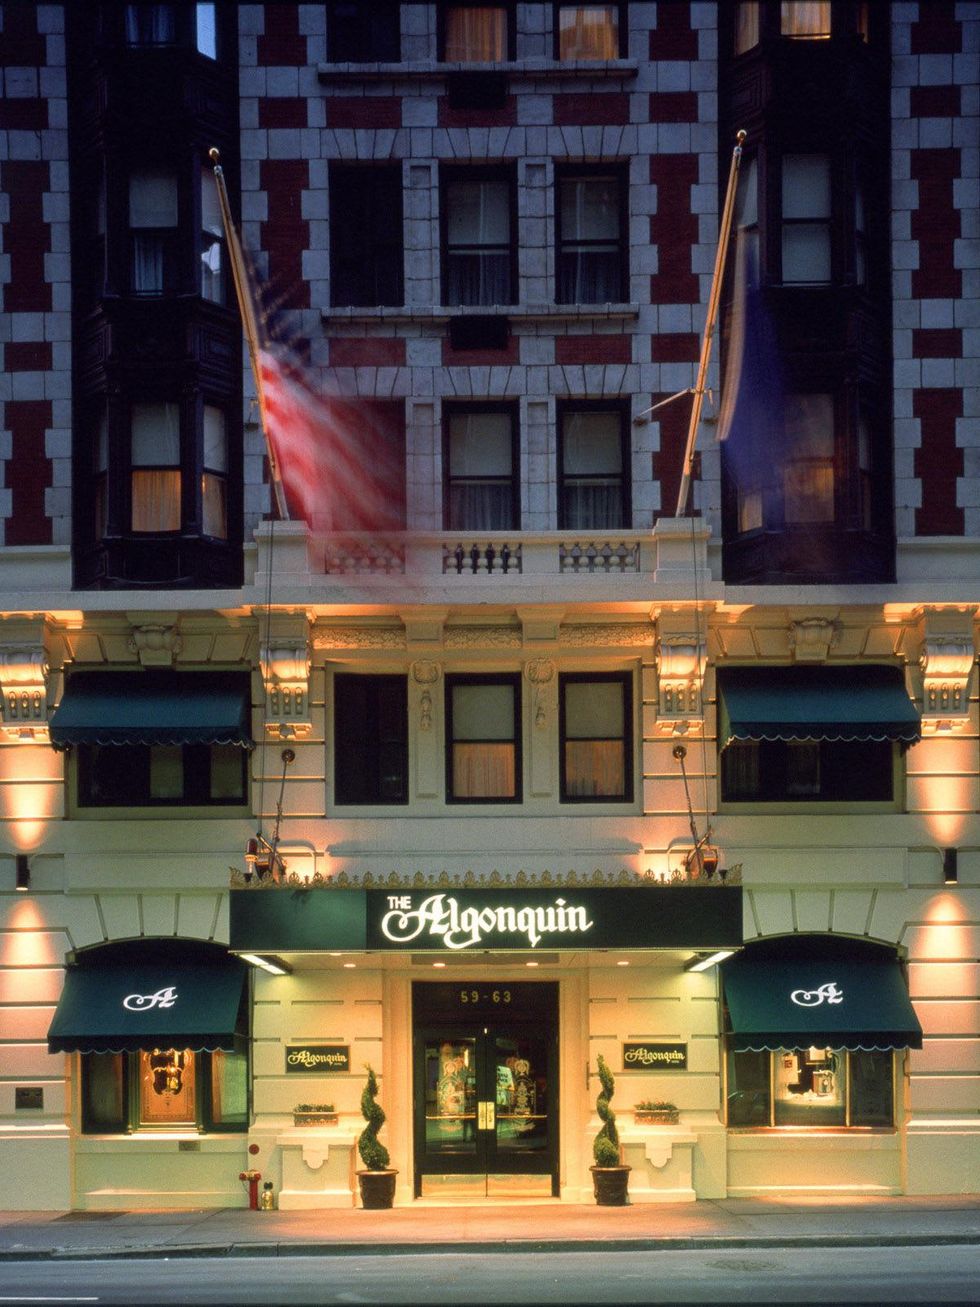 New York's newly remodeled Algonquin Hotel retains the spirit that made